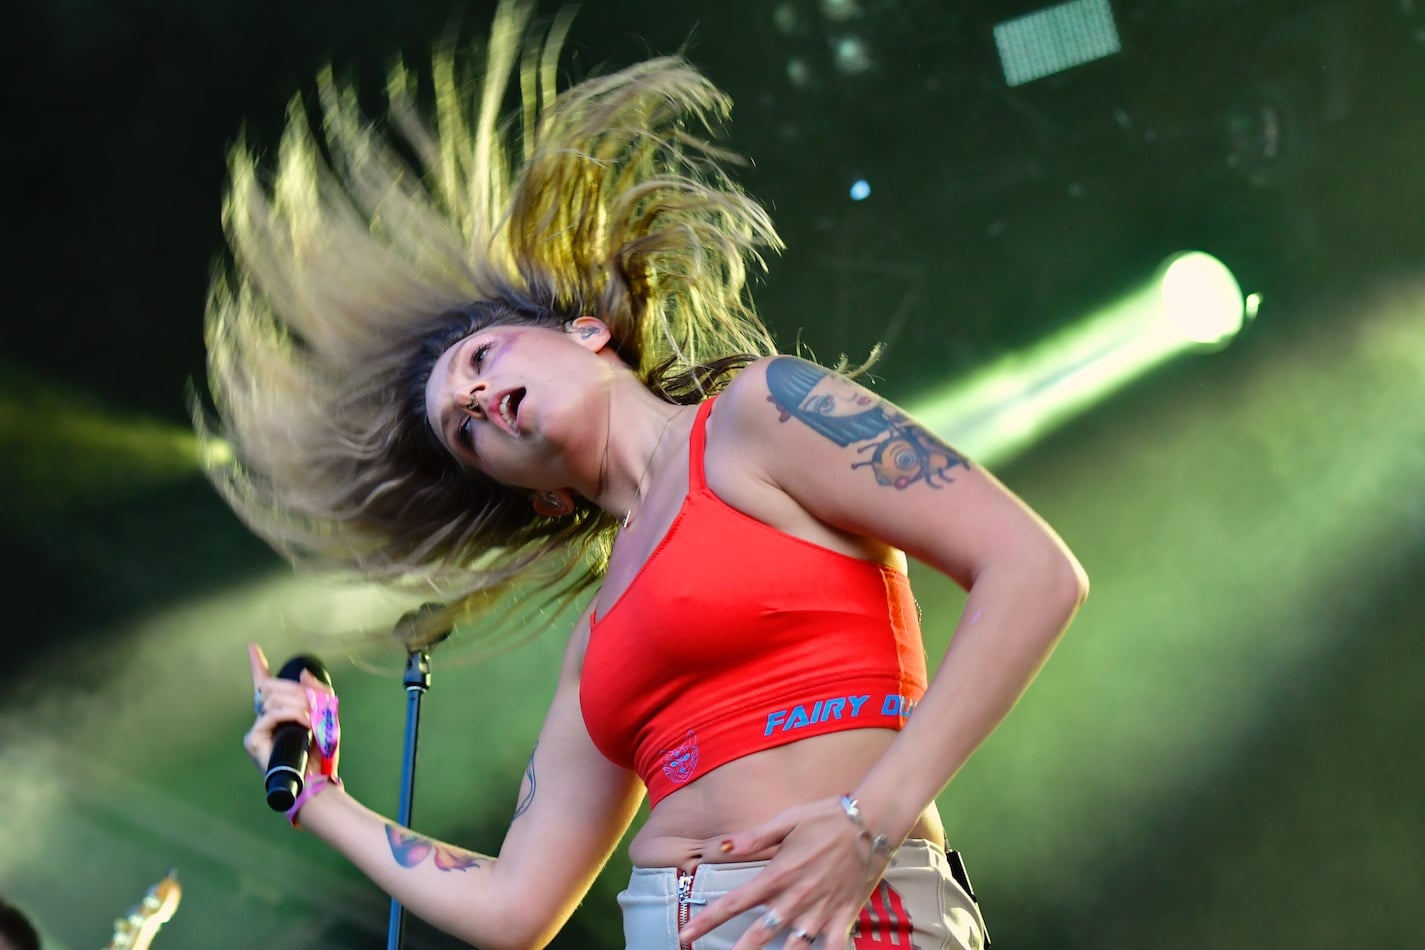 In Photos: Bonnaroo 2017, Friday (Featuring The Strumbellas, XX, Cold War Kids, Tove Lo)